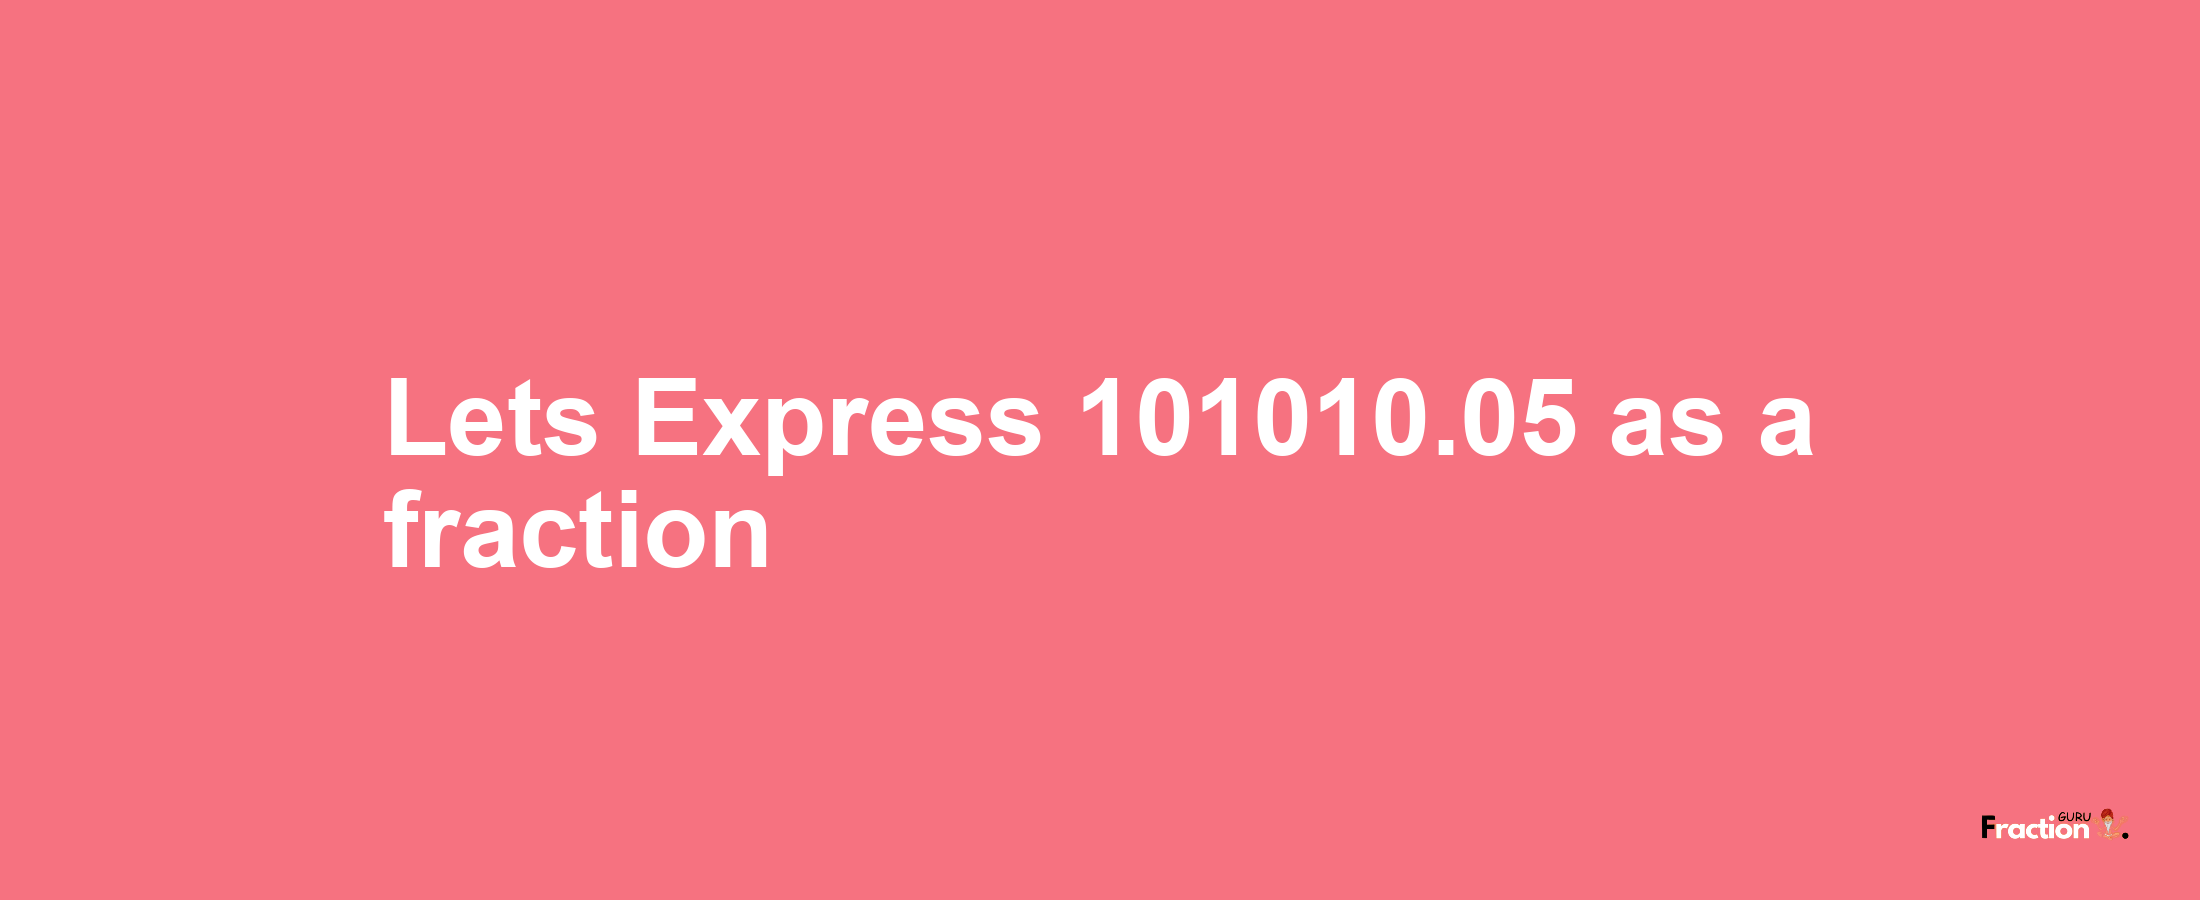 Lets Express 101010.05 as afraction